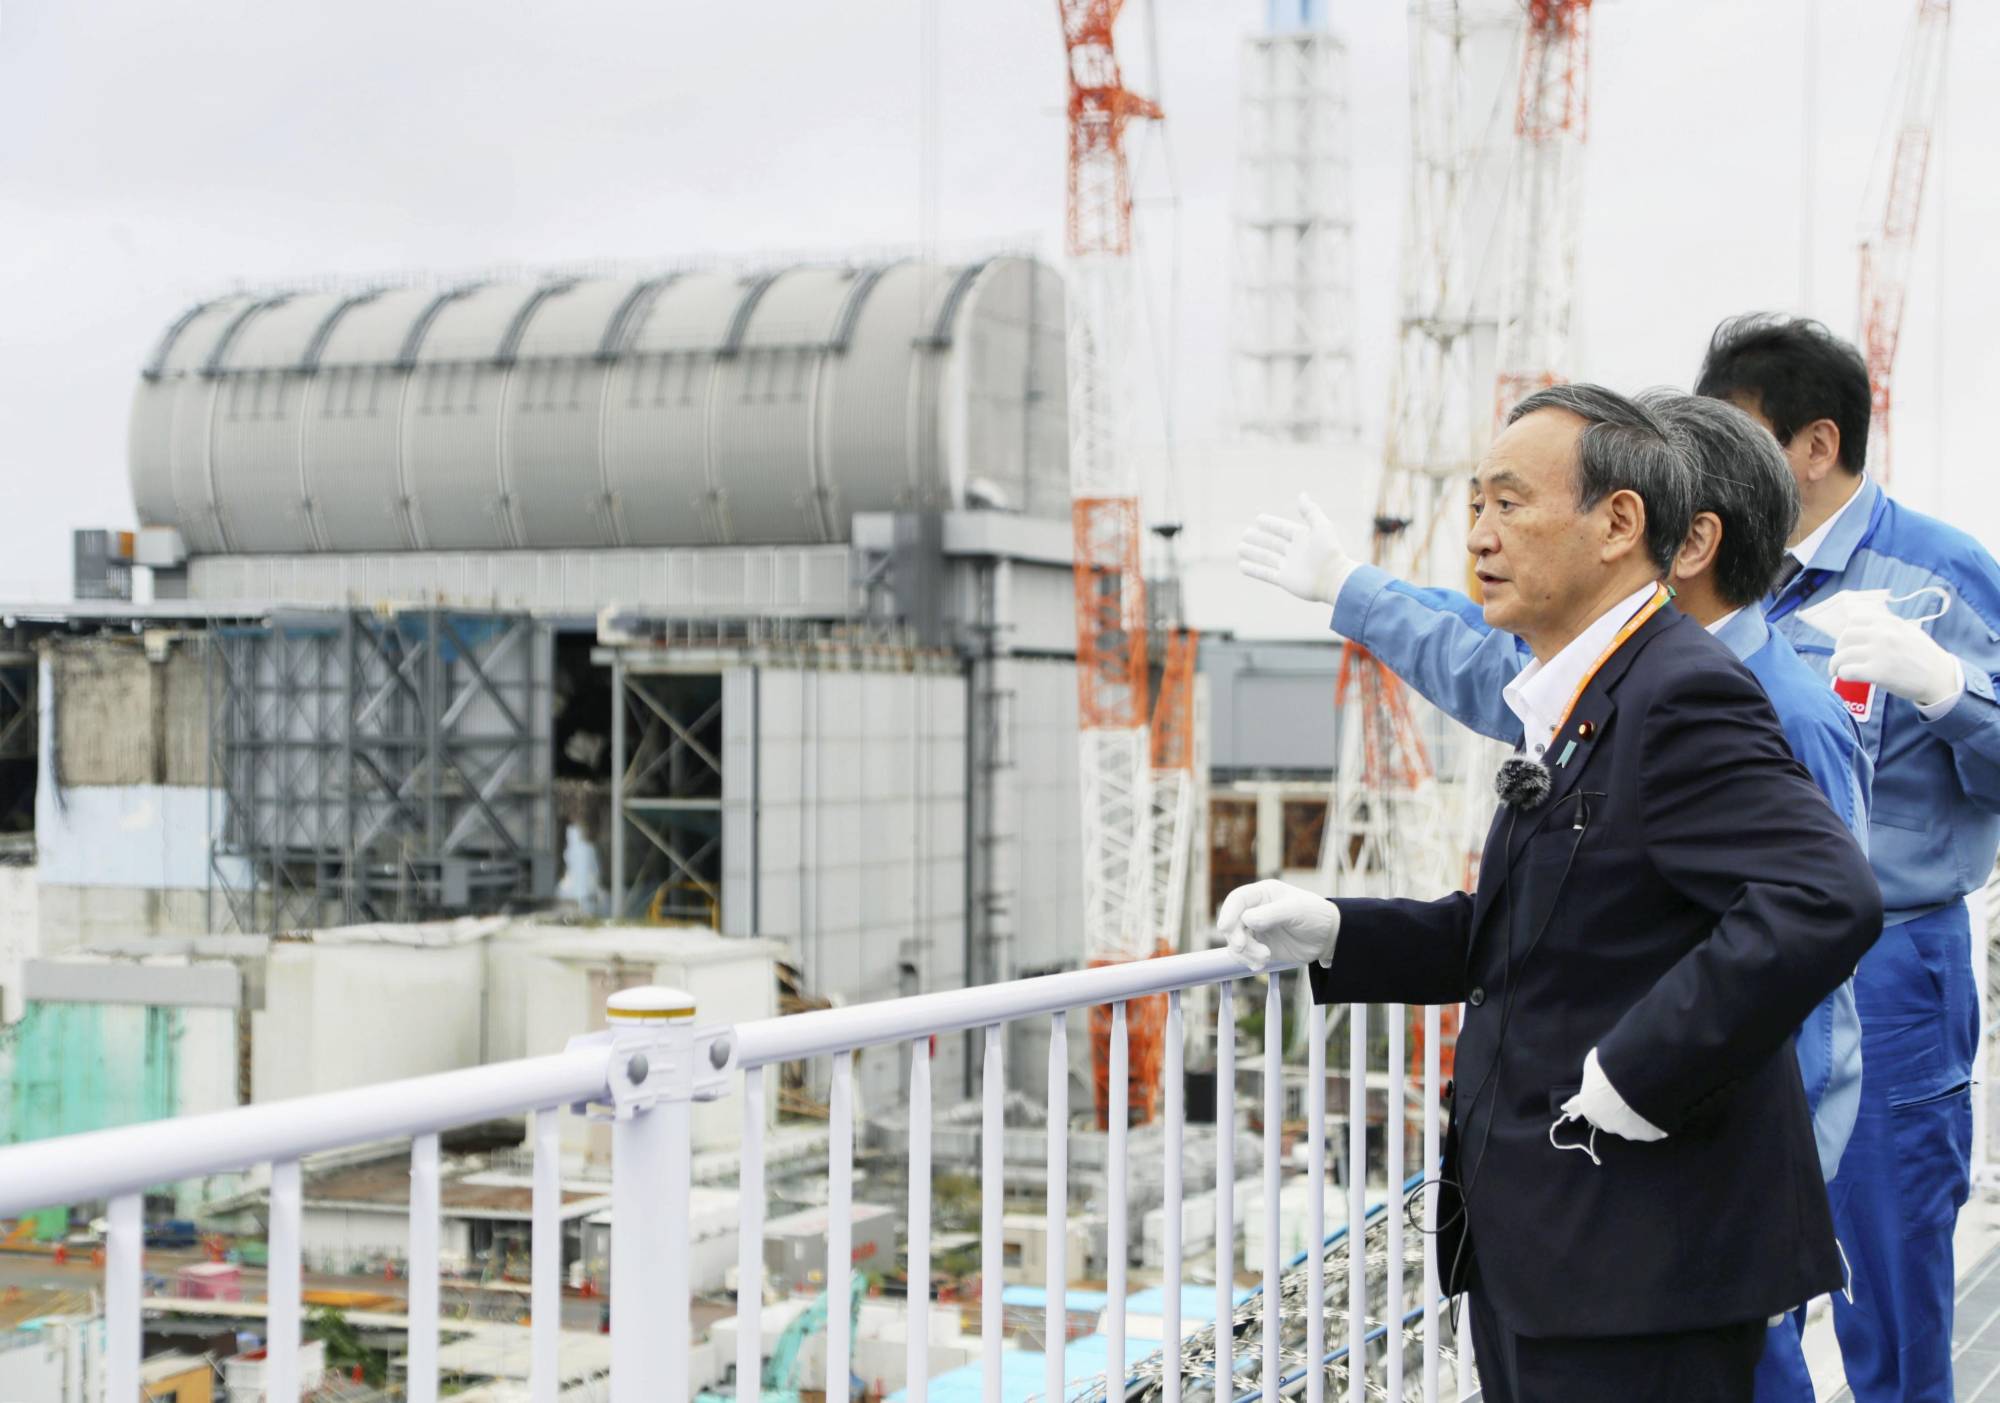 Prime Minister Yoshide Suga visited the Fukushima No. 1 nuclear power plant on Sept. 26, a month before vowing to reduce Japan's carbon emissions to zero by 2050. | POOL / VIA KYODO